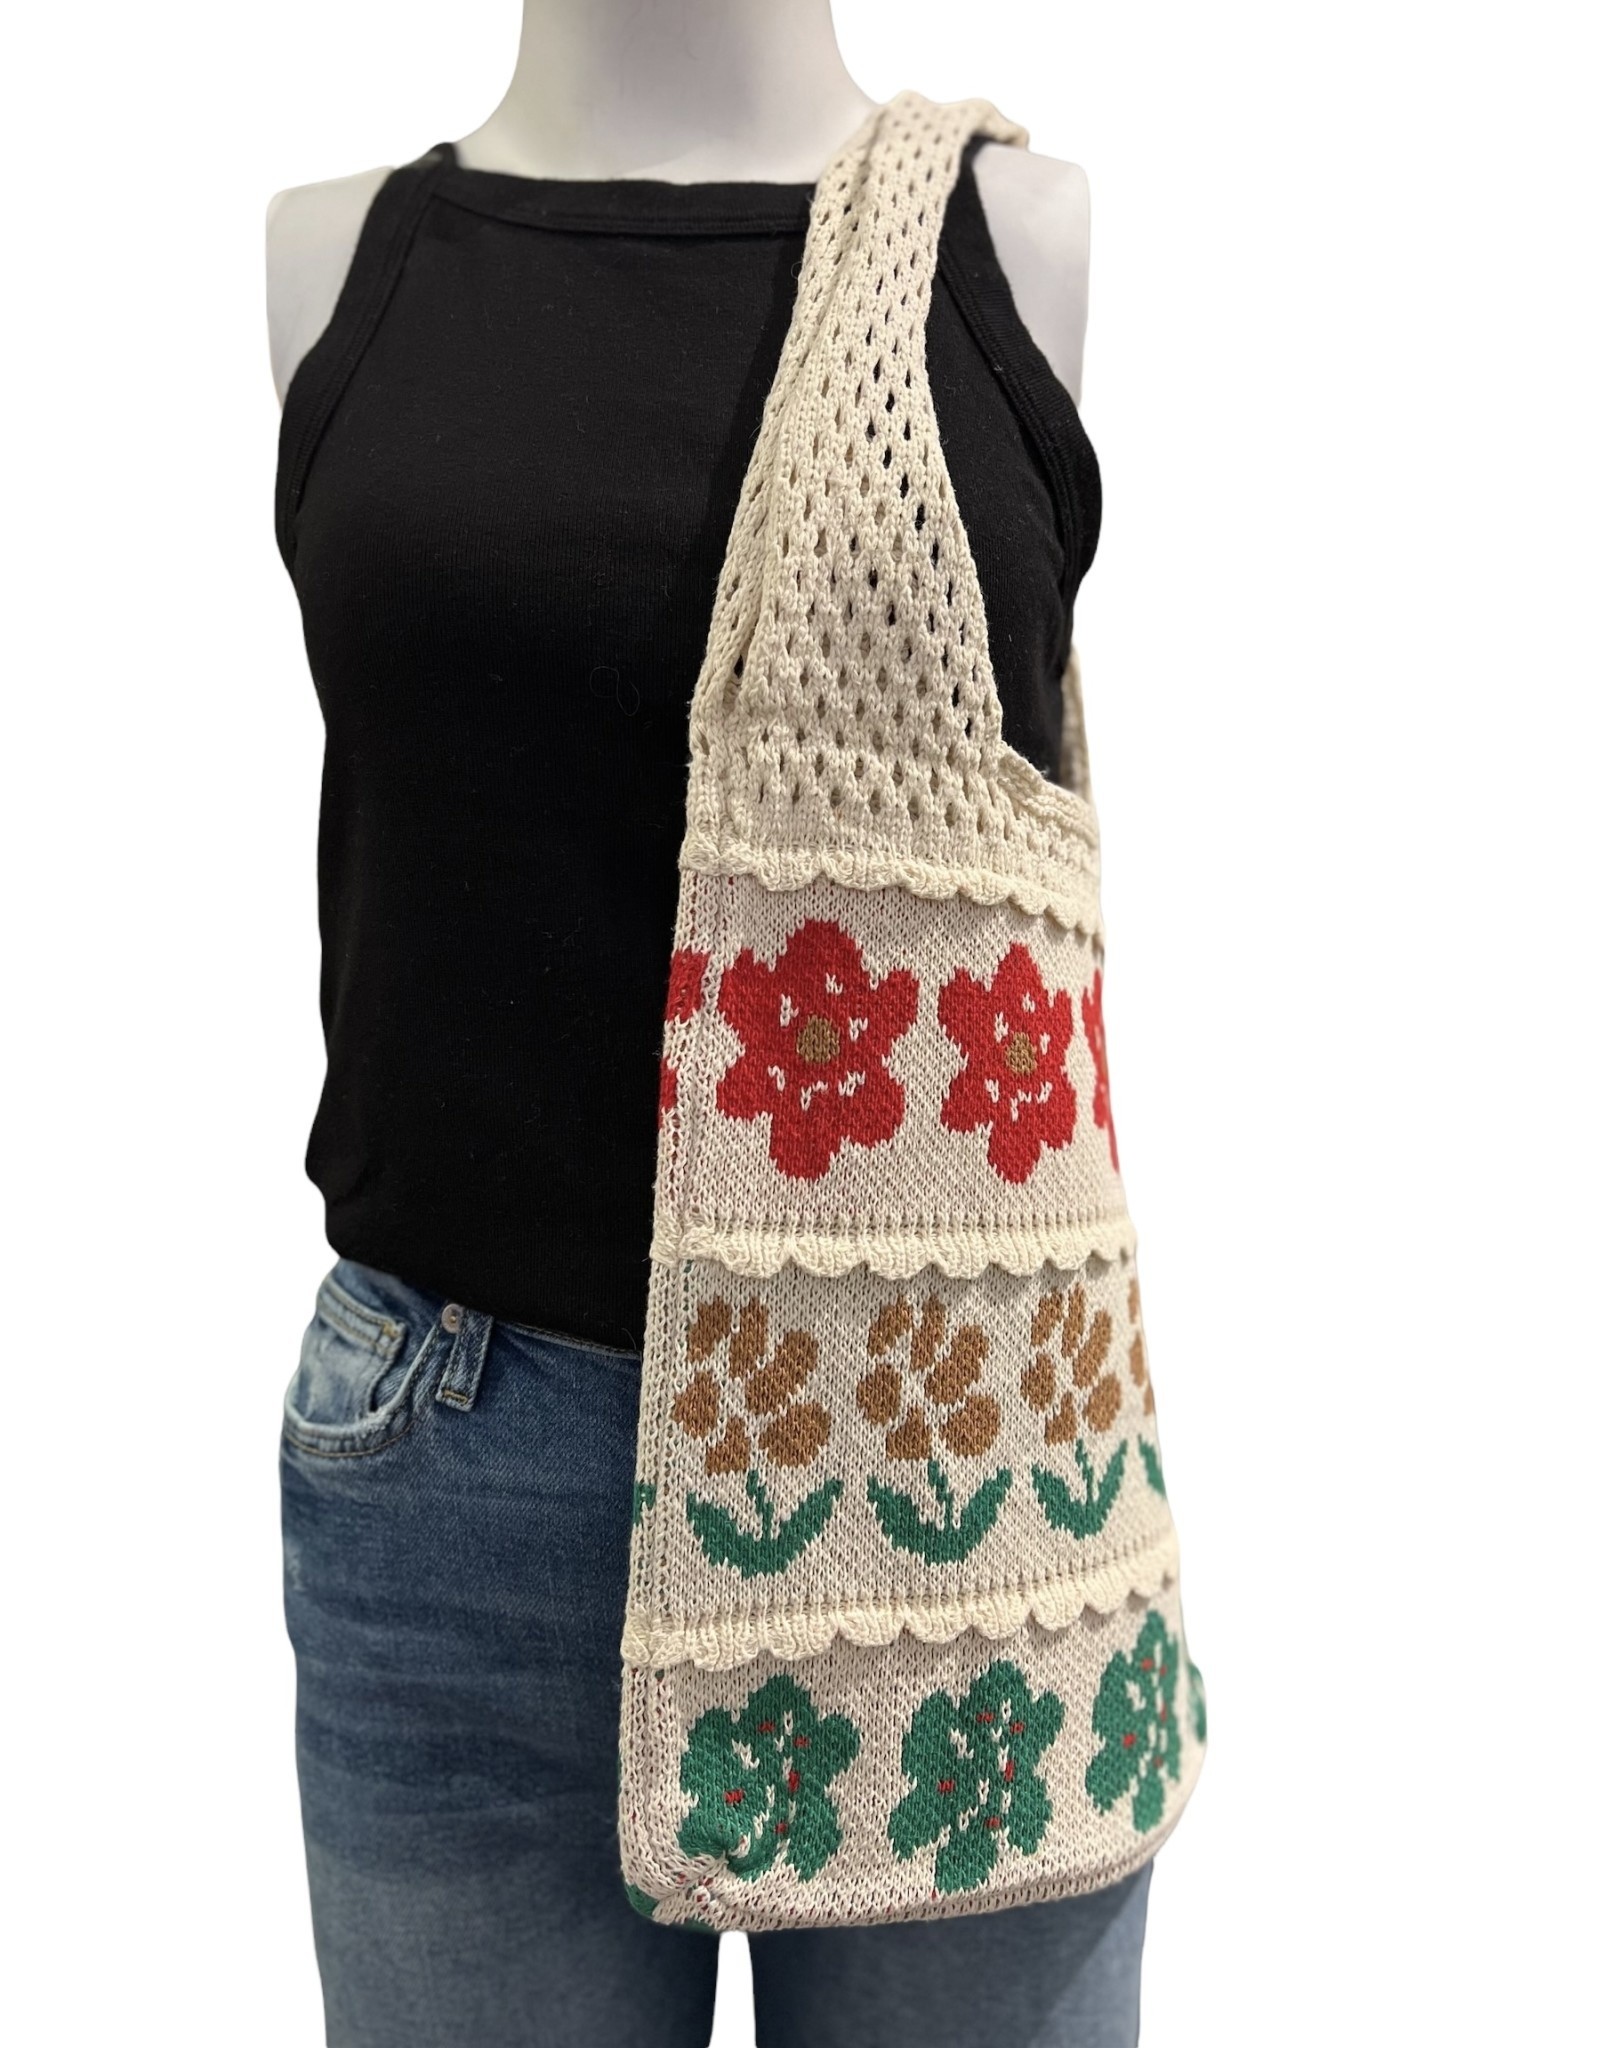 Urban Daizy Crochet Knit Slouch Tote